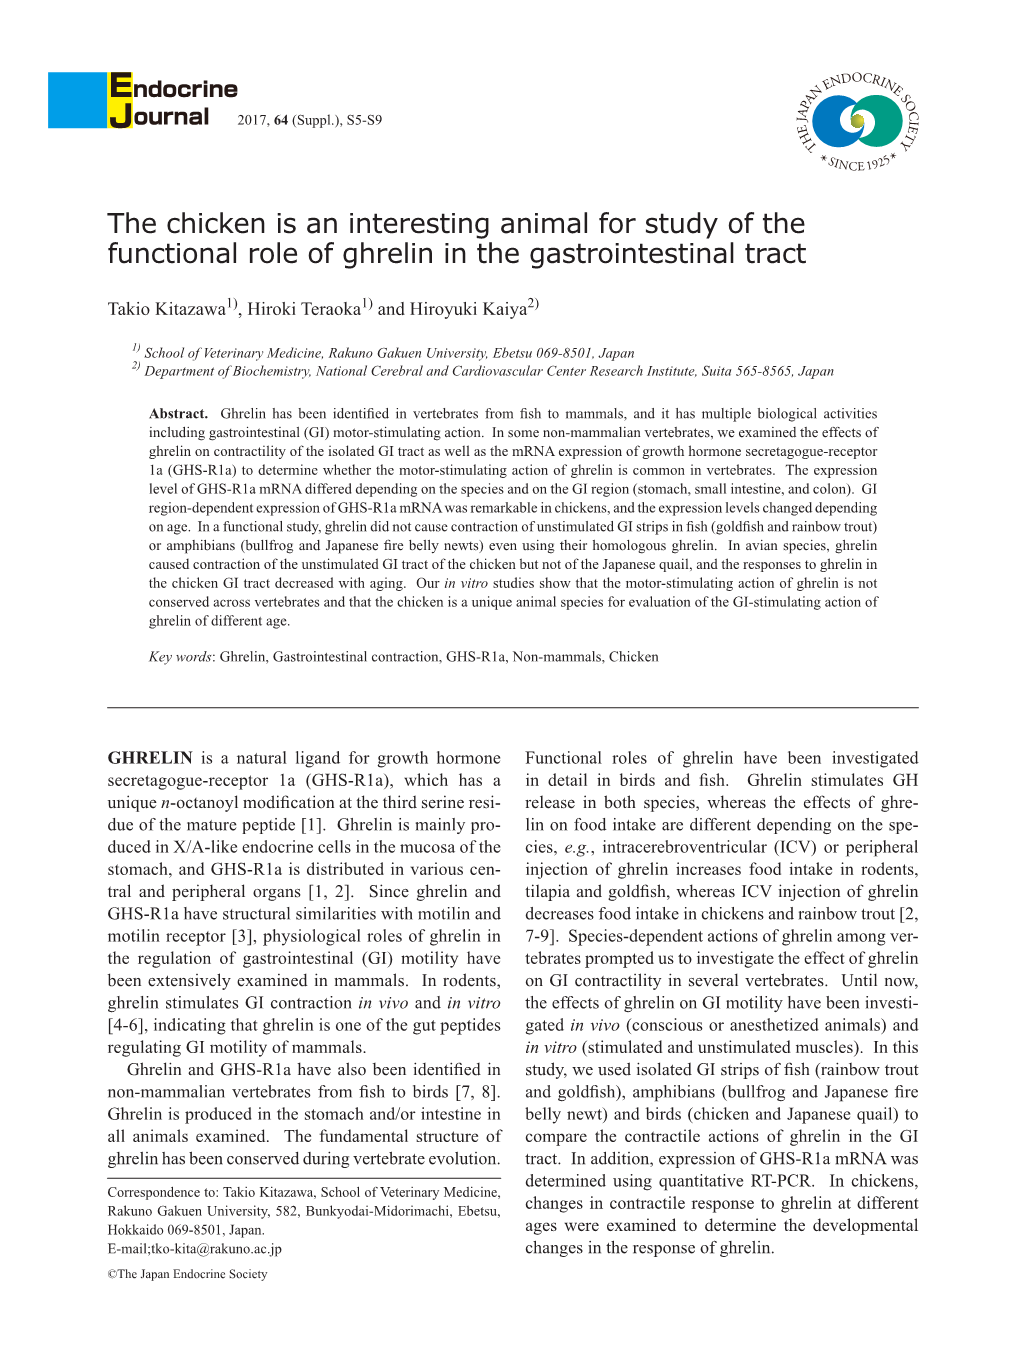 The Chicken Is an Interesting Animal for Study of the Functional Role of Ghrelin in the Gastrointestinal Tract